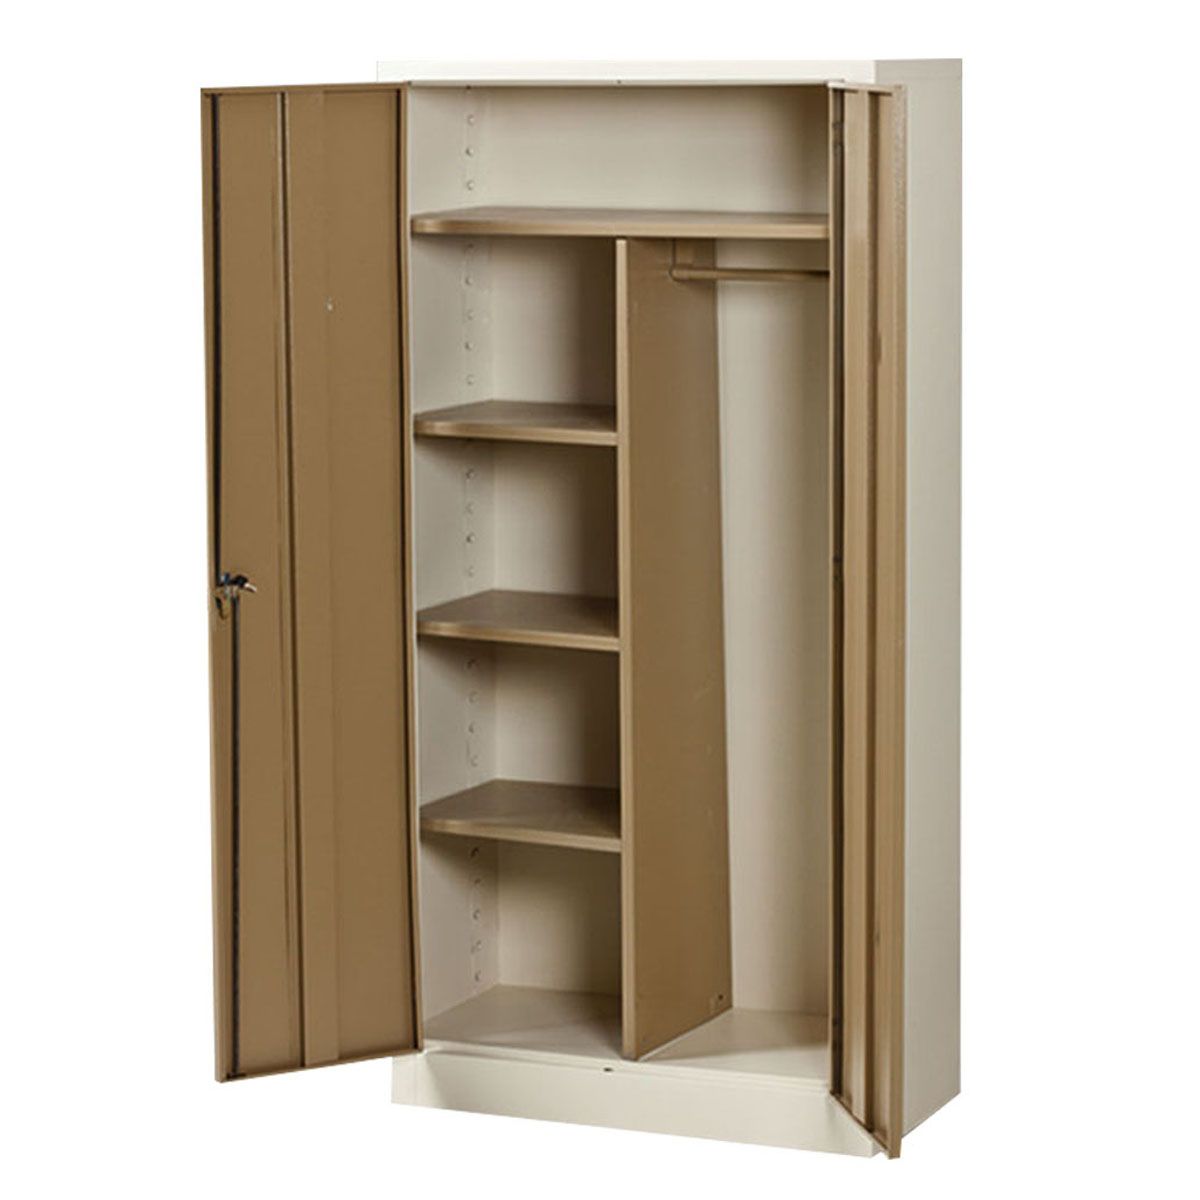 Popular Heavy Duty Wardrobes For Heavy Duty Steel Gents Wardrobe. Shop Online And Save. (Photo 3 of 10)